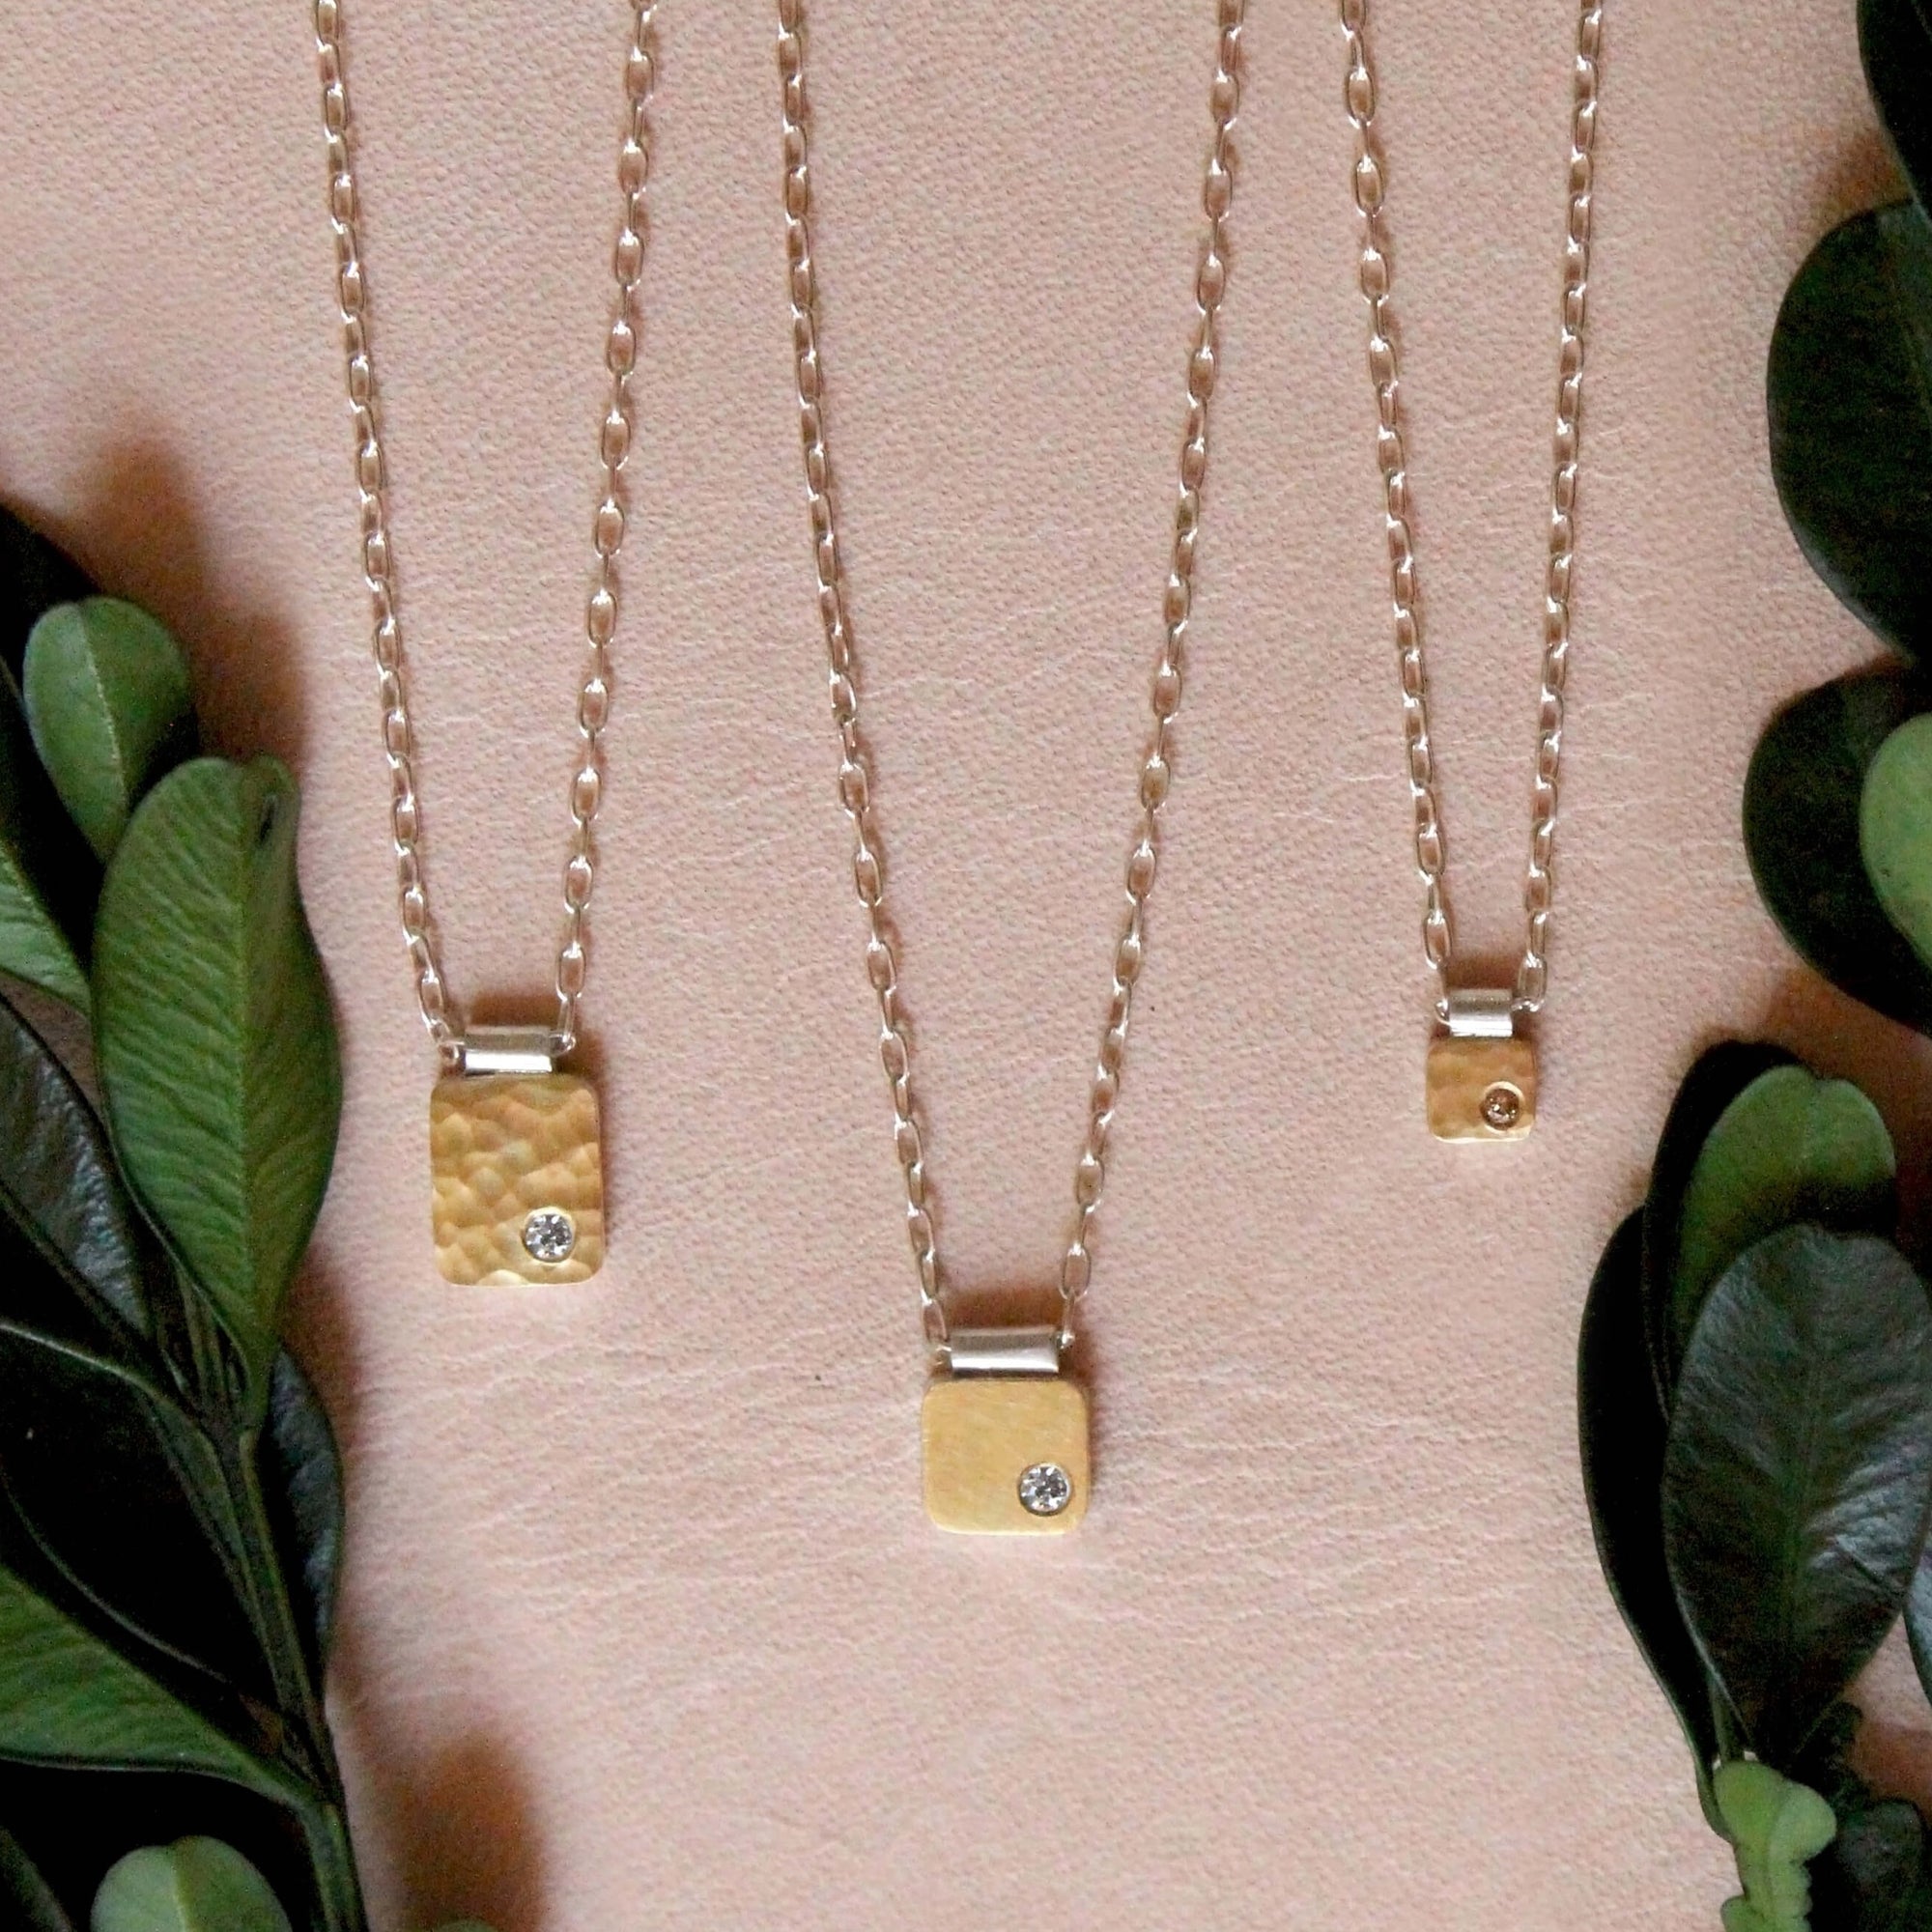 Yellow gold and white diamond rectangle cell pendant. Handmade by EC Design Jewelry in Minneapolis, MN using recycled metal and conflict-free stone.